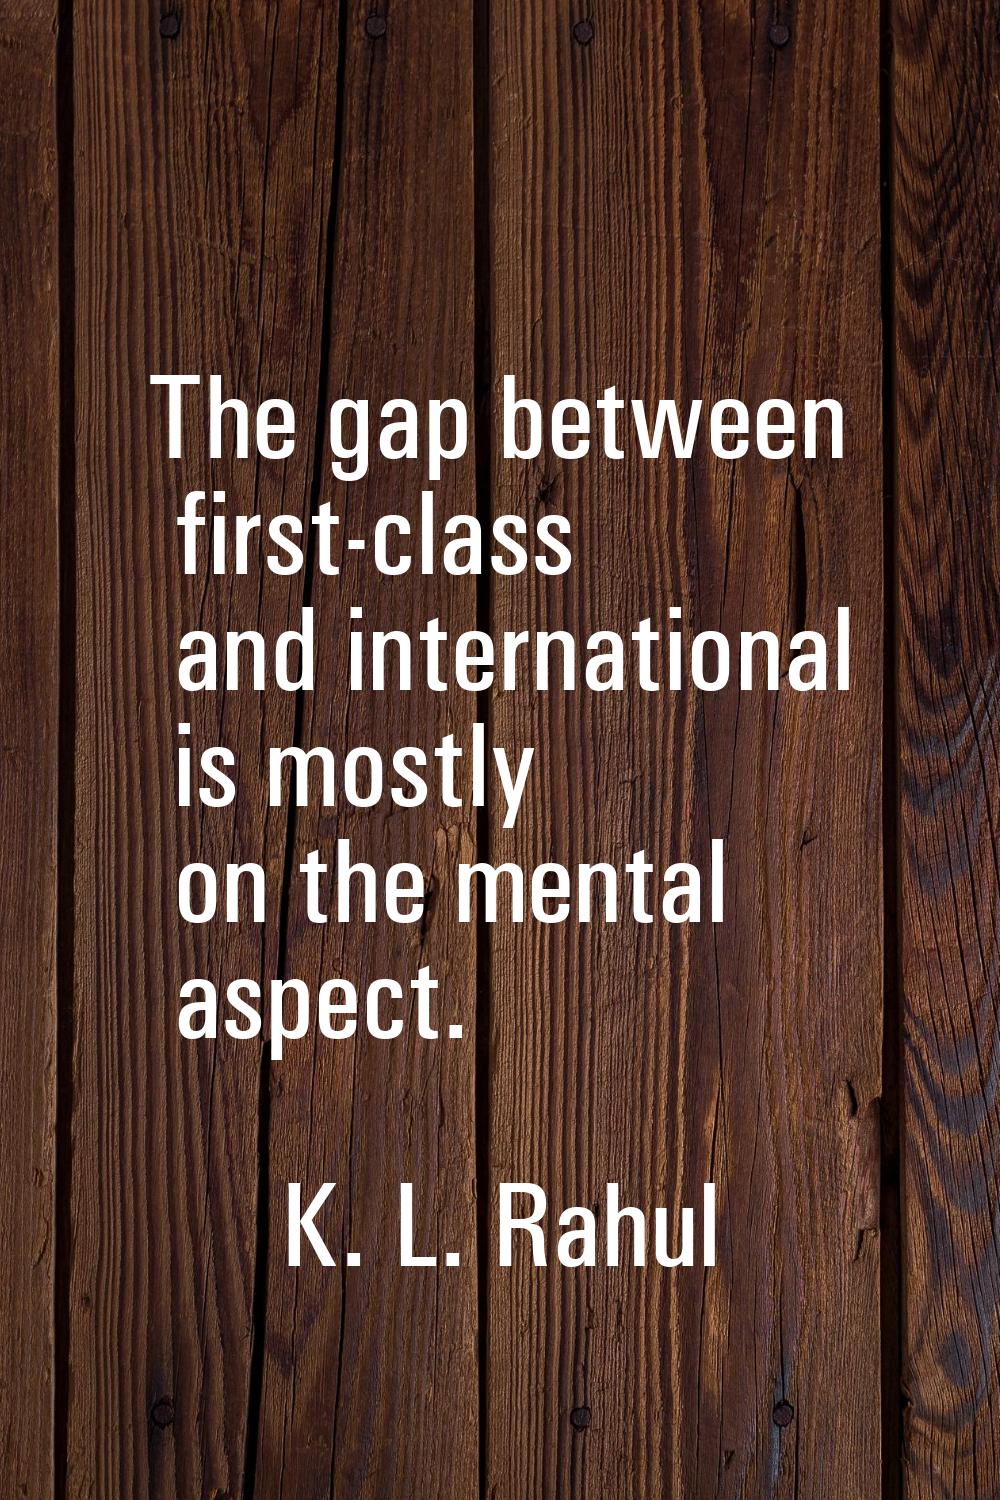 The gap between first-class and international is mostly on the mental aspect.